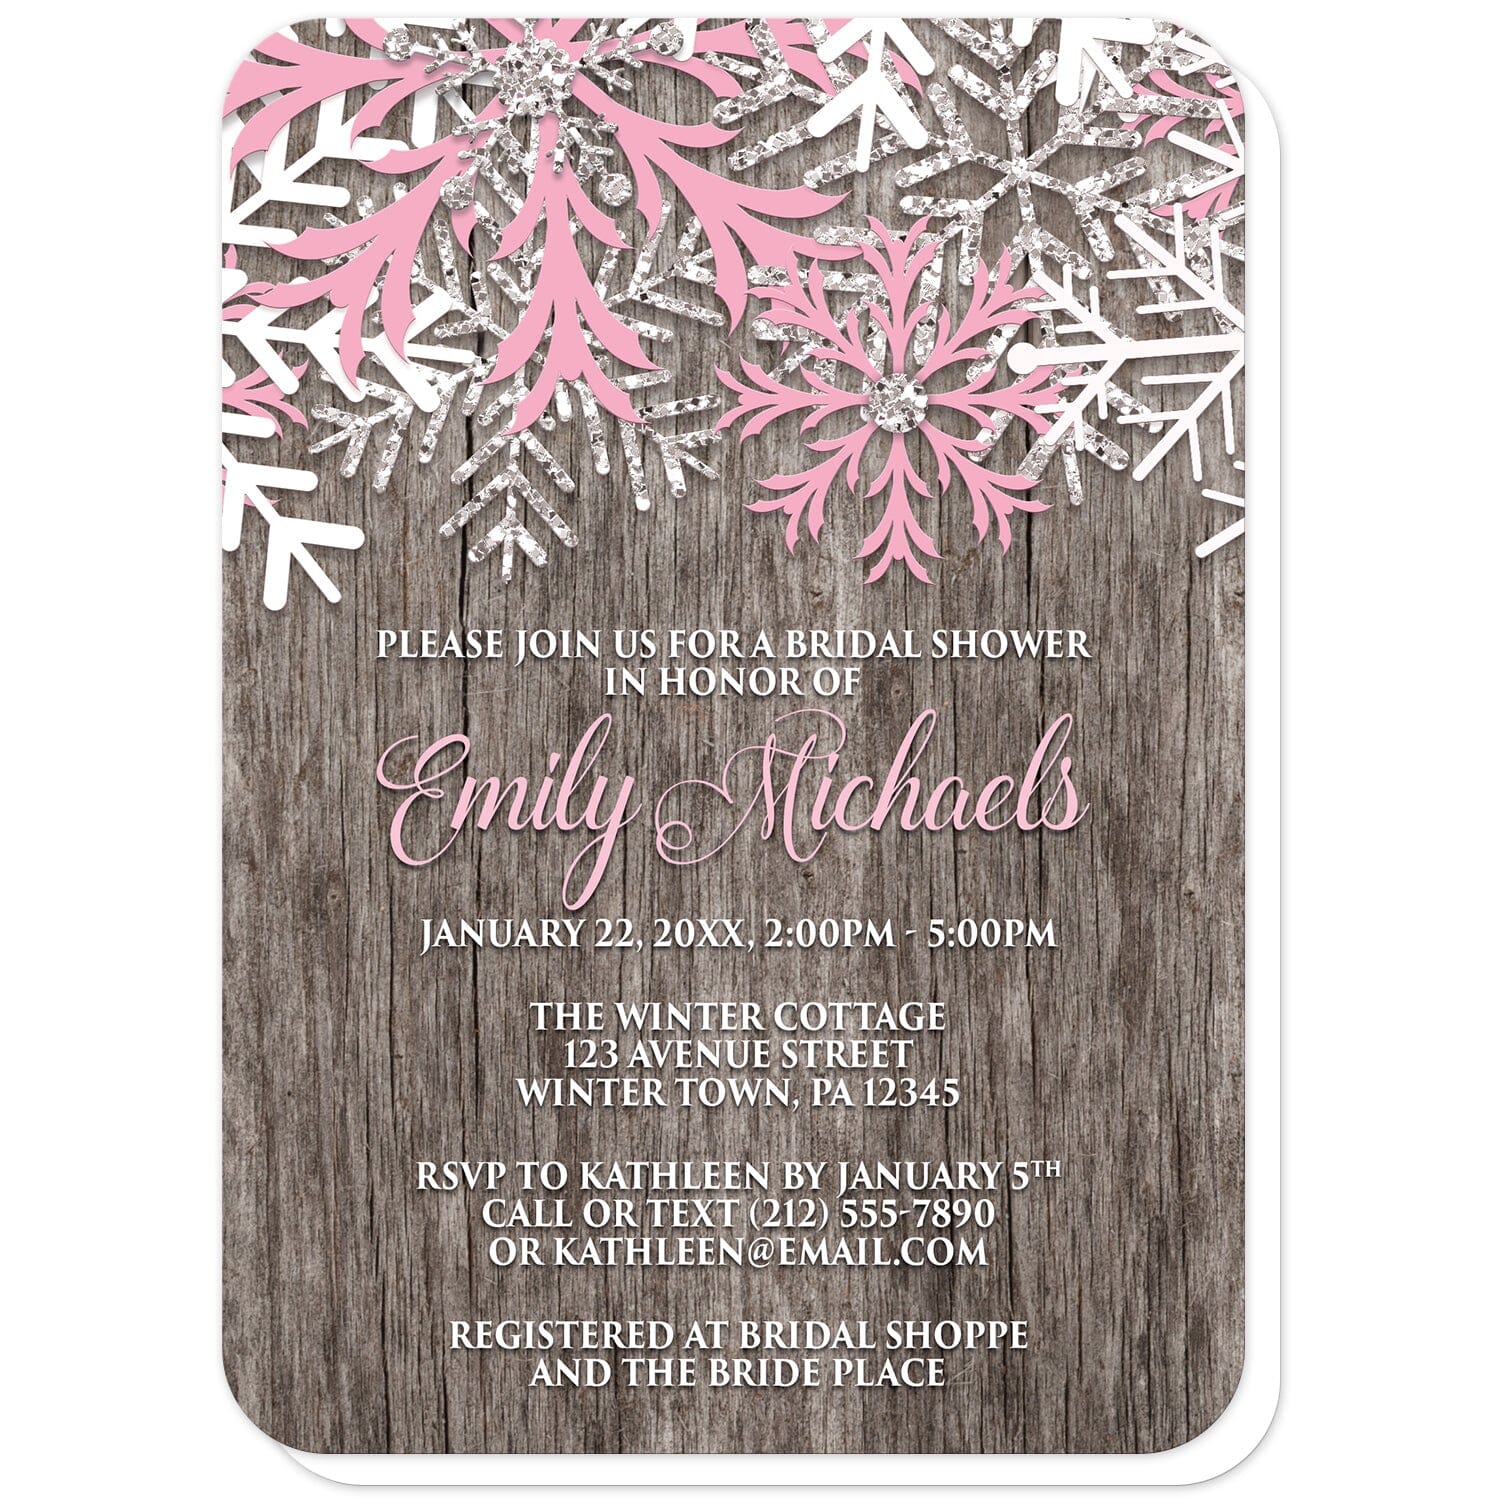 Rustic Winter Wood Pink Snowflake Bridal Shower Invitations (with rounded corners)  at Artistically Invited. Country-inspired rustic winter wood pink snowflake bridal shower invitations designed with pink, white, and silver-colored glitter-illustrated snowflakes along the top over a rustic wood pattern illustration. Your personalized bridal shower celebration details are custom printed in pink and white over the wood background below the snowflakes.